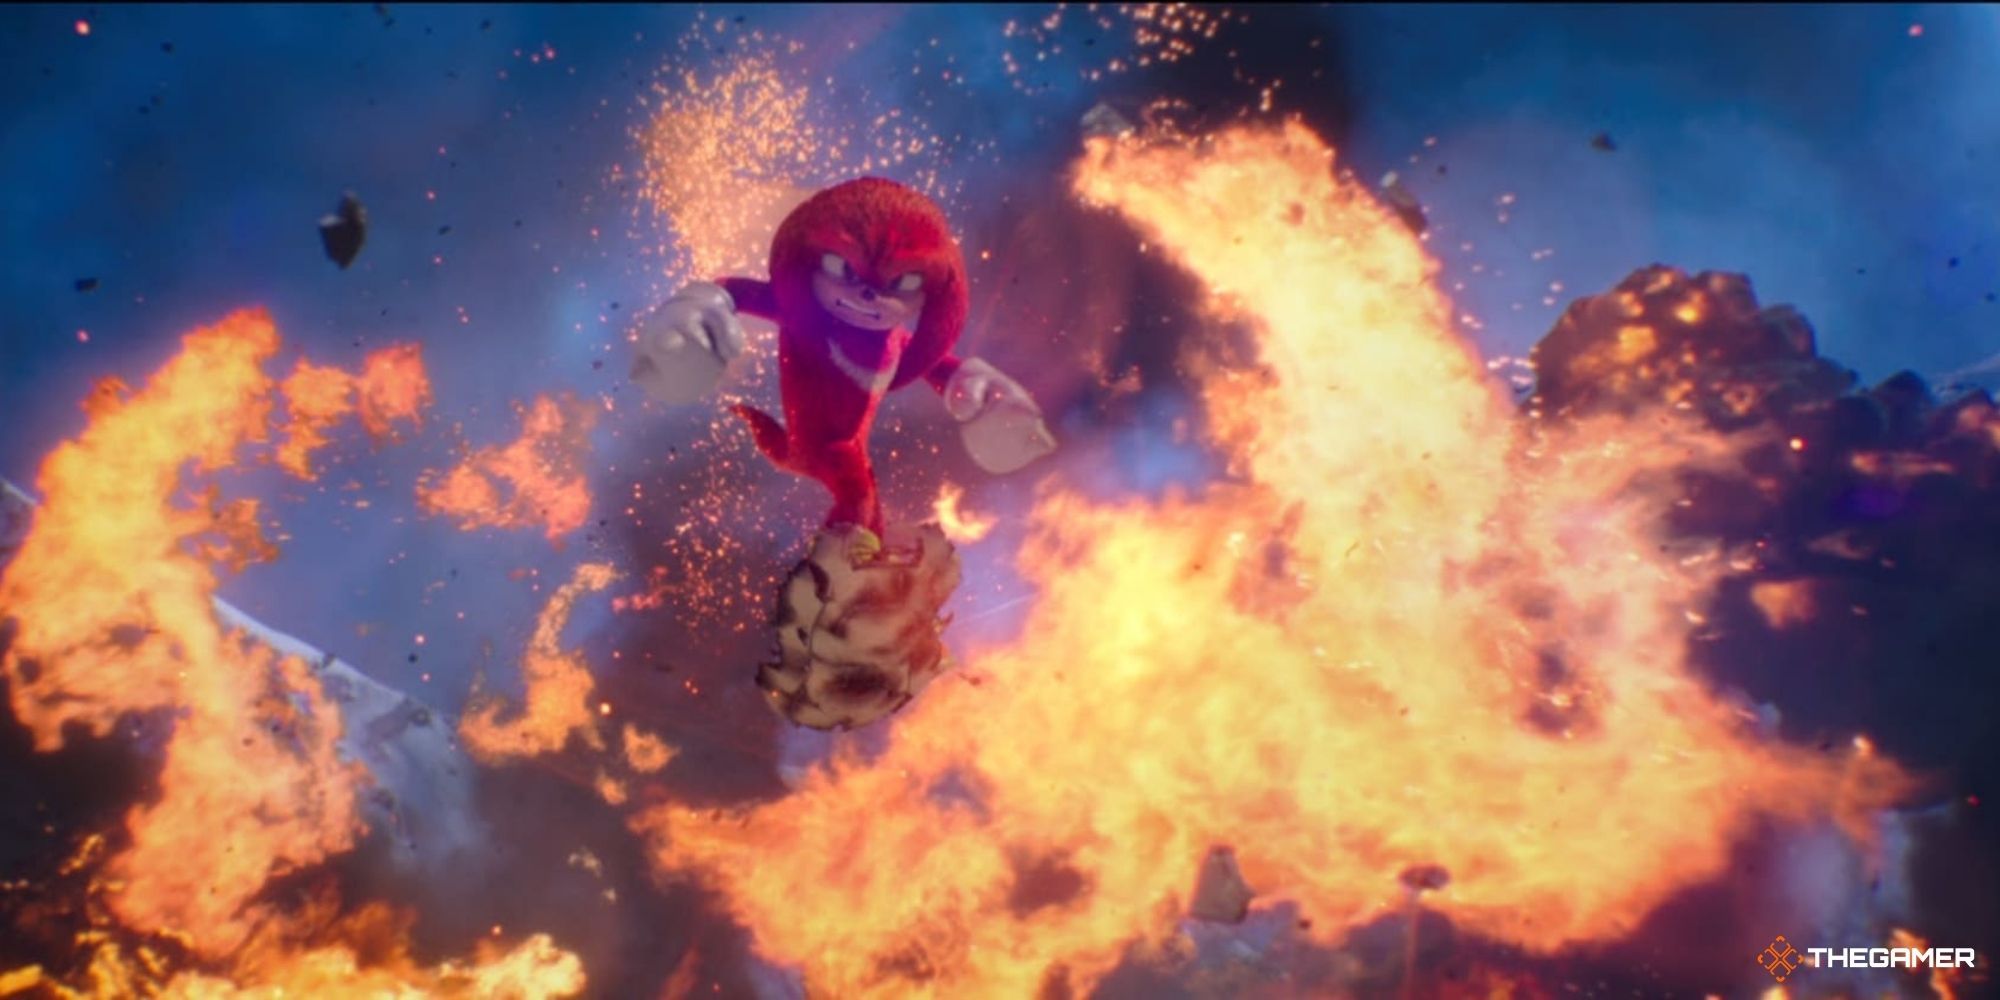 Sonic the Hedgehog - Knuckles surrounded by fire